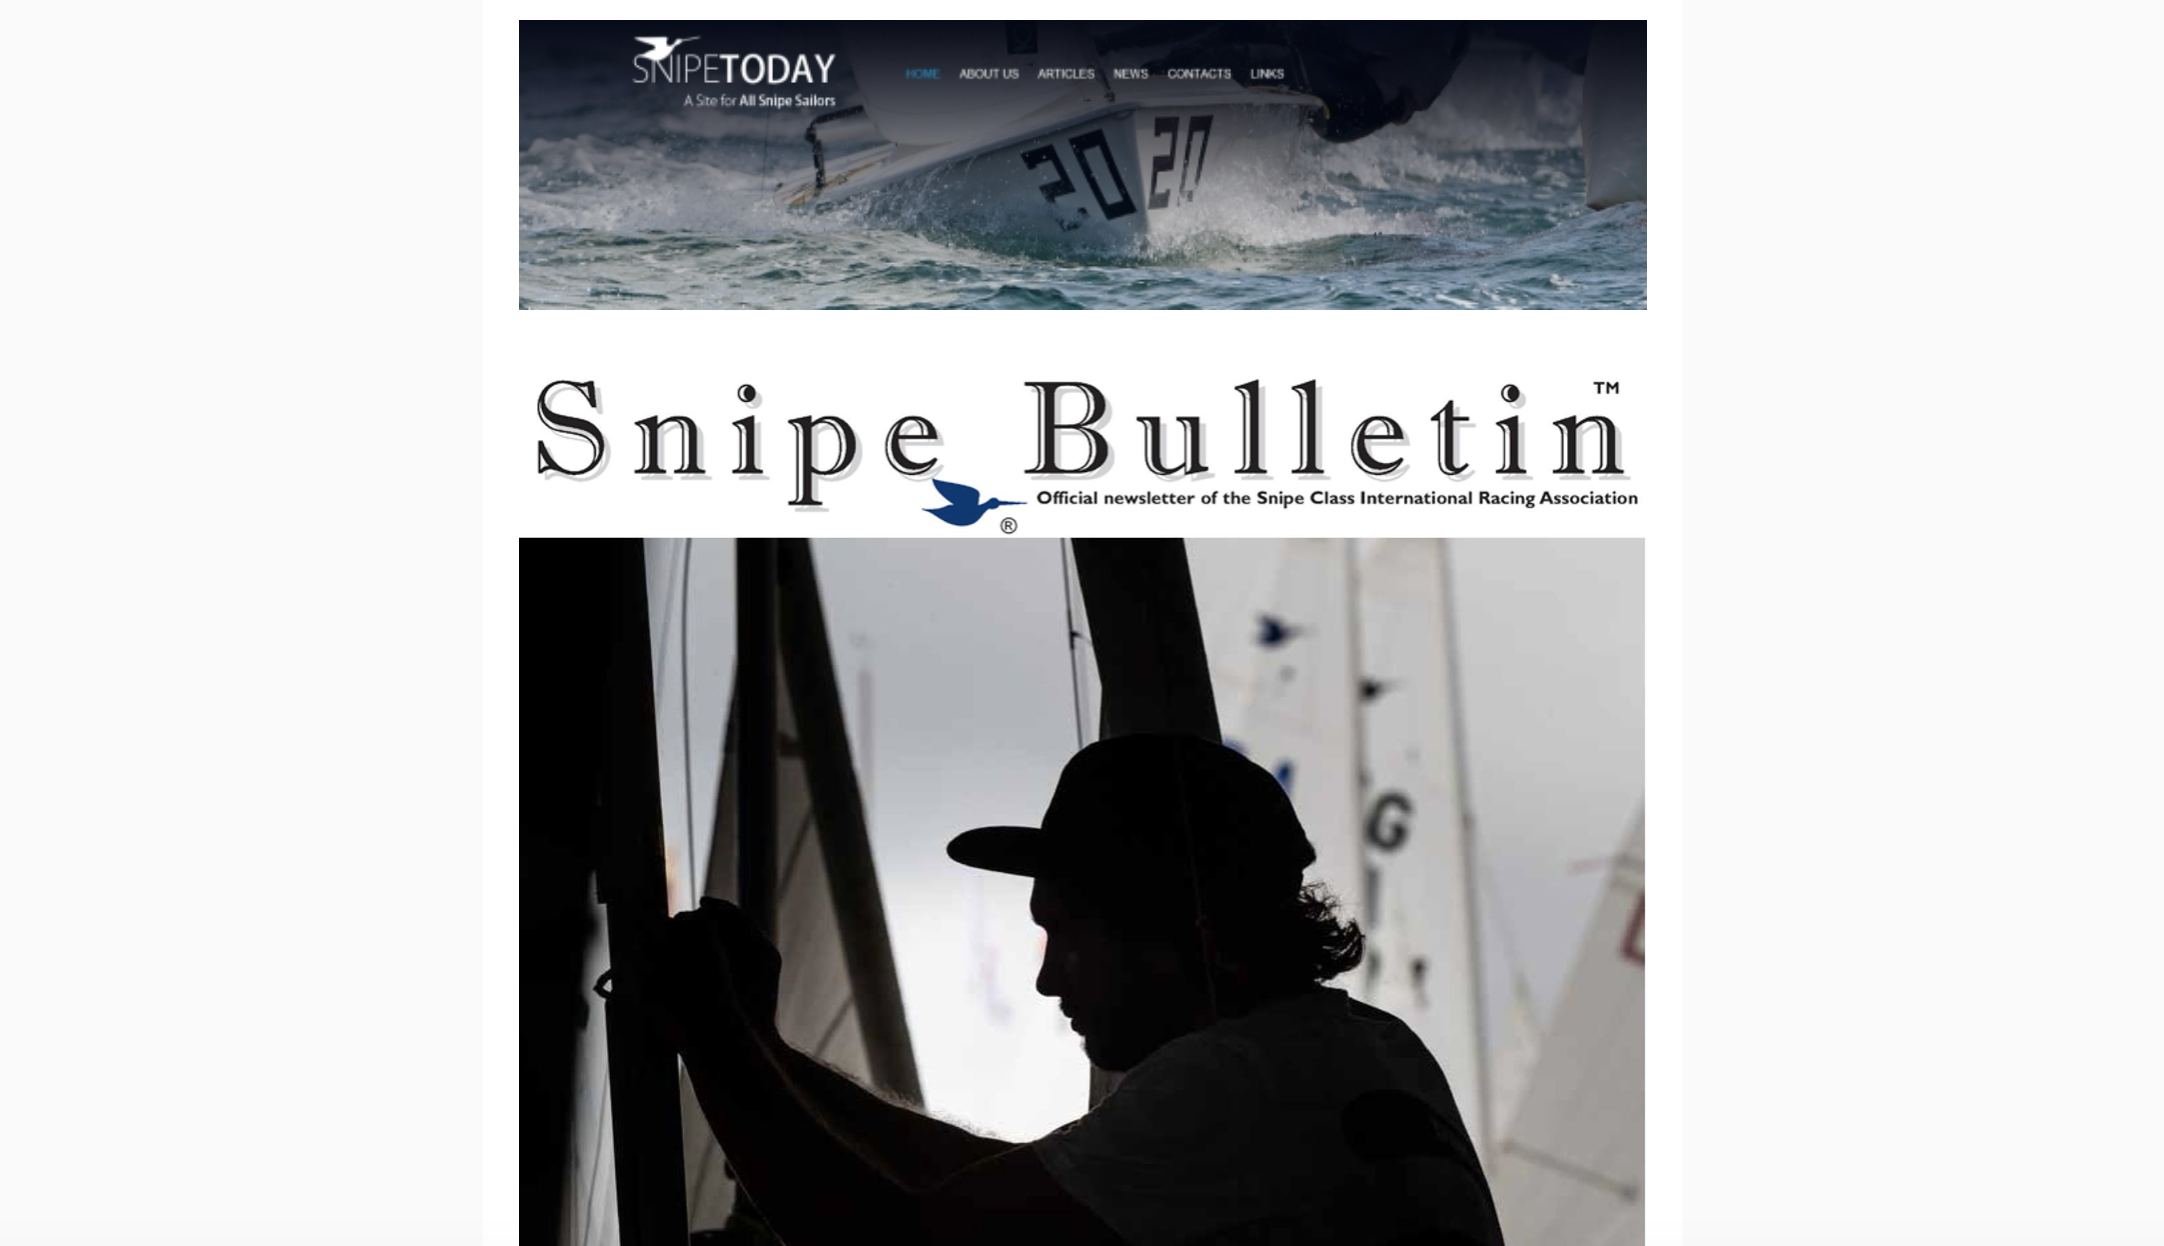 SnipeToday Stories This Week Image